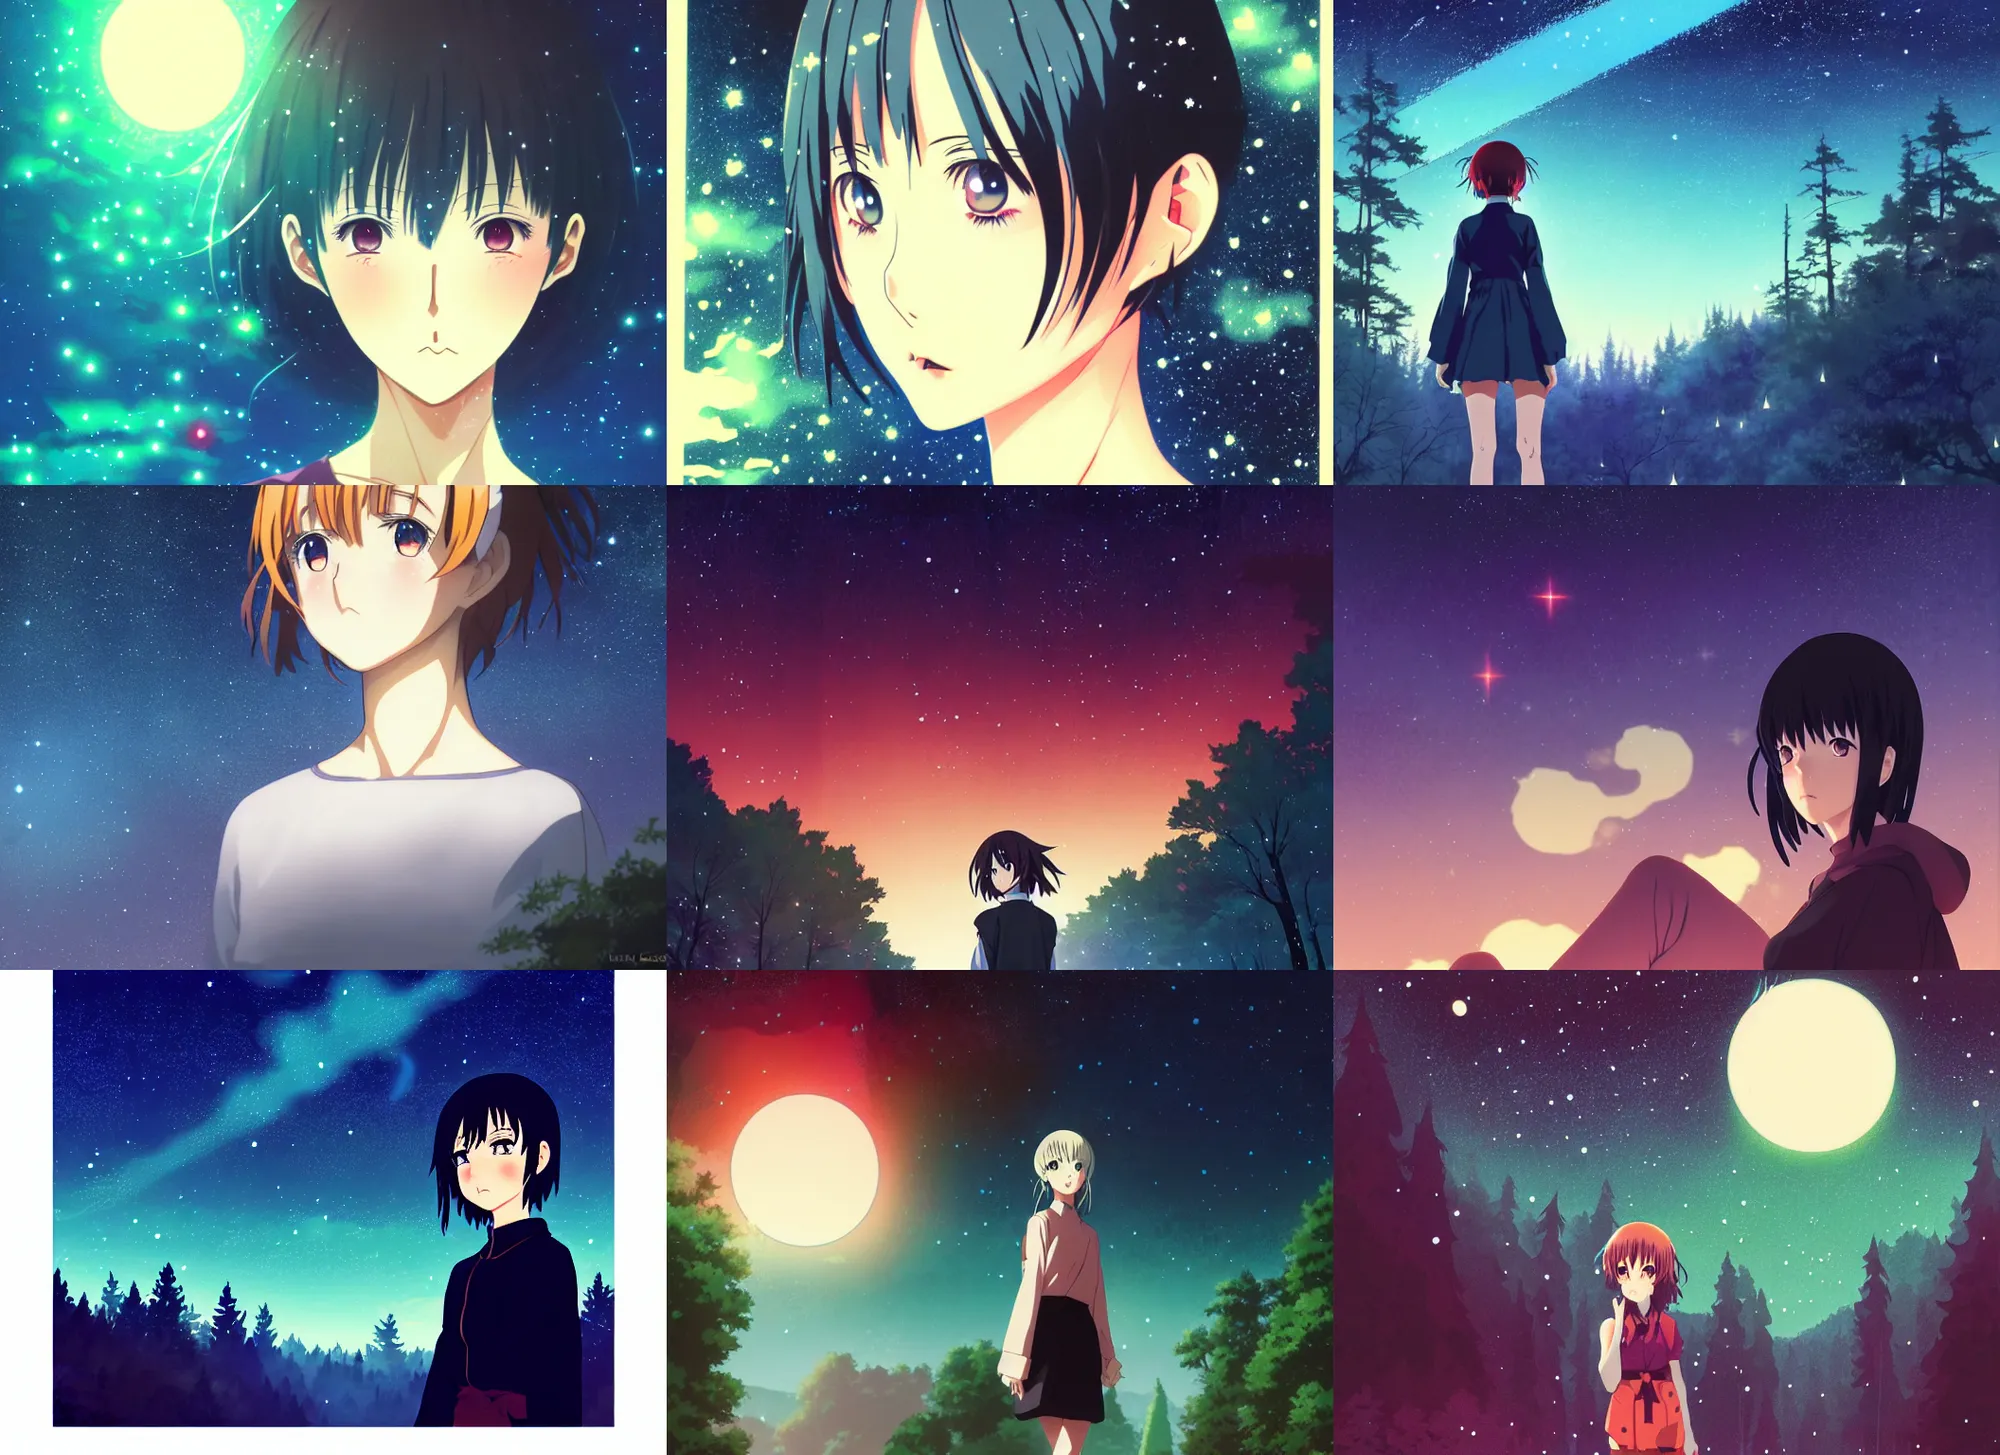 Prompt: anime cels, anime key visual, young woman traveling in a forest at night, night sky, nebula, very dark, cute face by ilya kuvshinov, yoh yoshinari, dynamic pose, dynamic perspective, rounded eyes, smooth facial features, dramatic lighting, flat